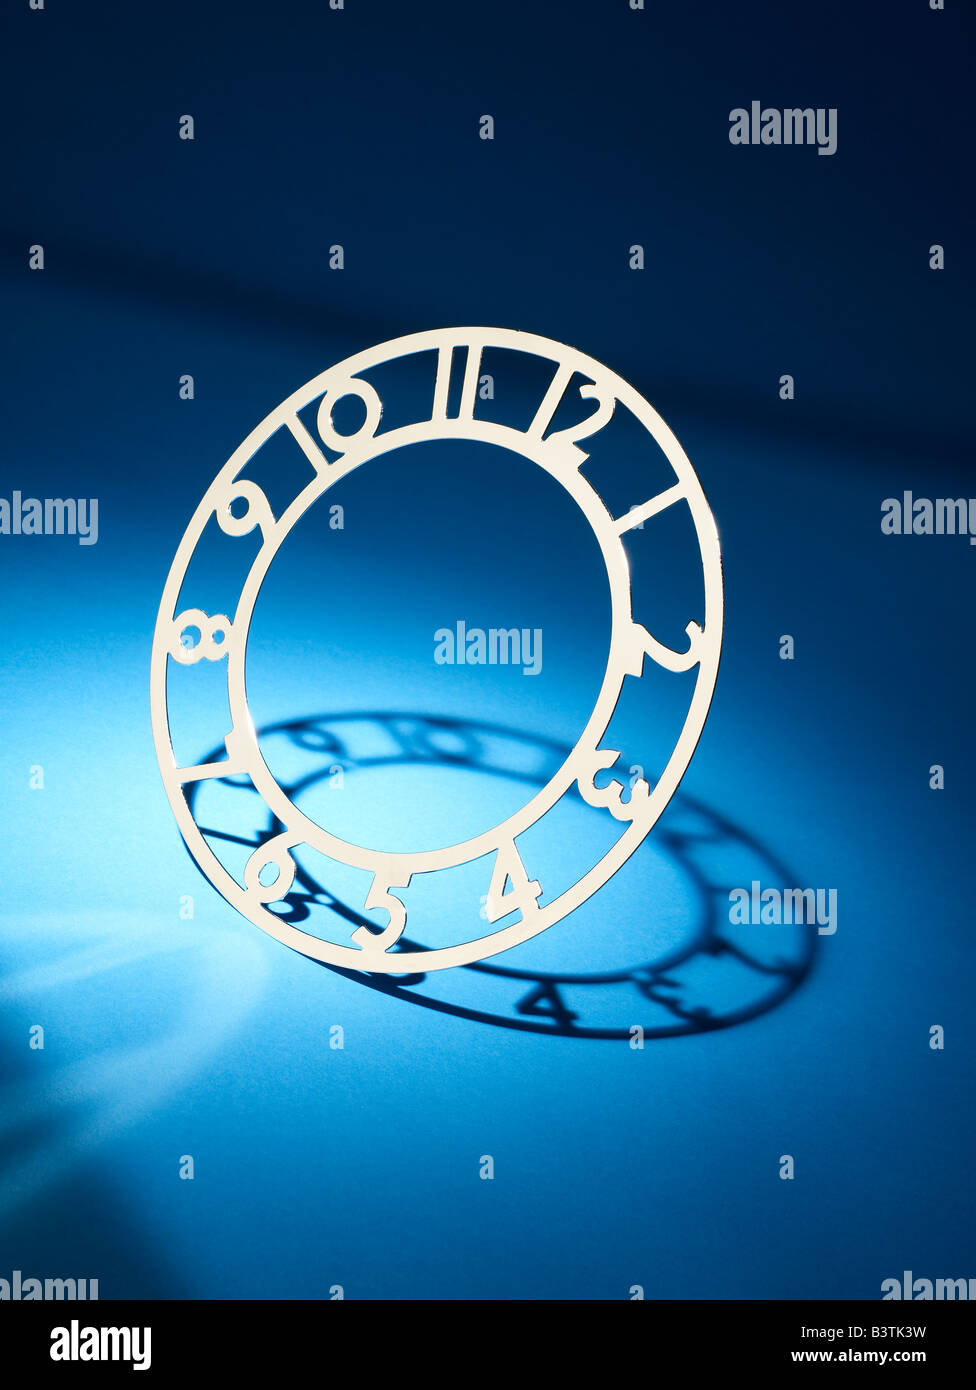 Clock face numbers vertical Stock Photo